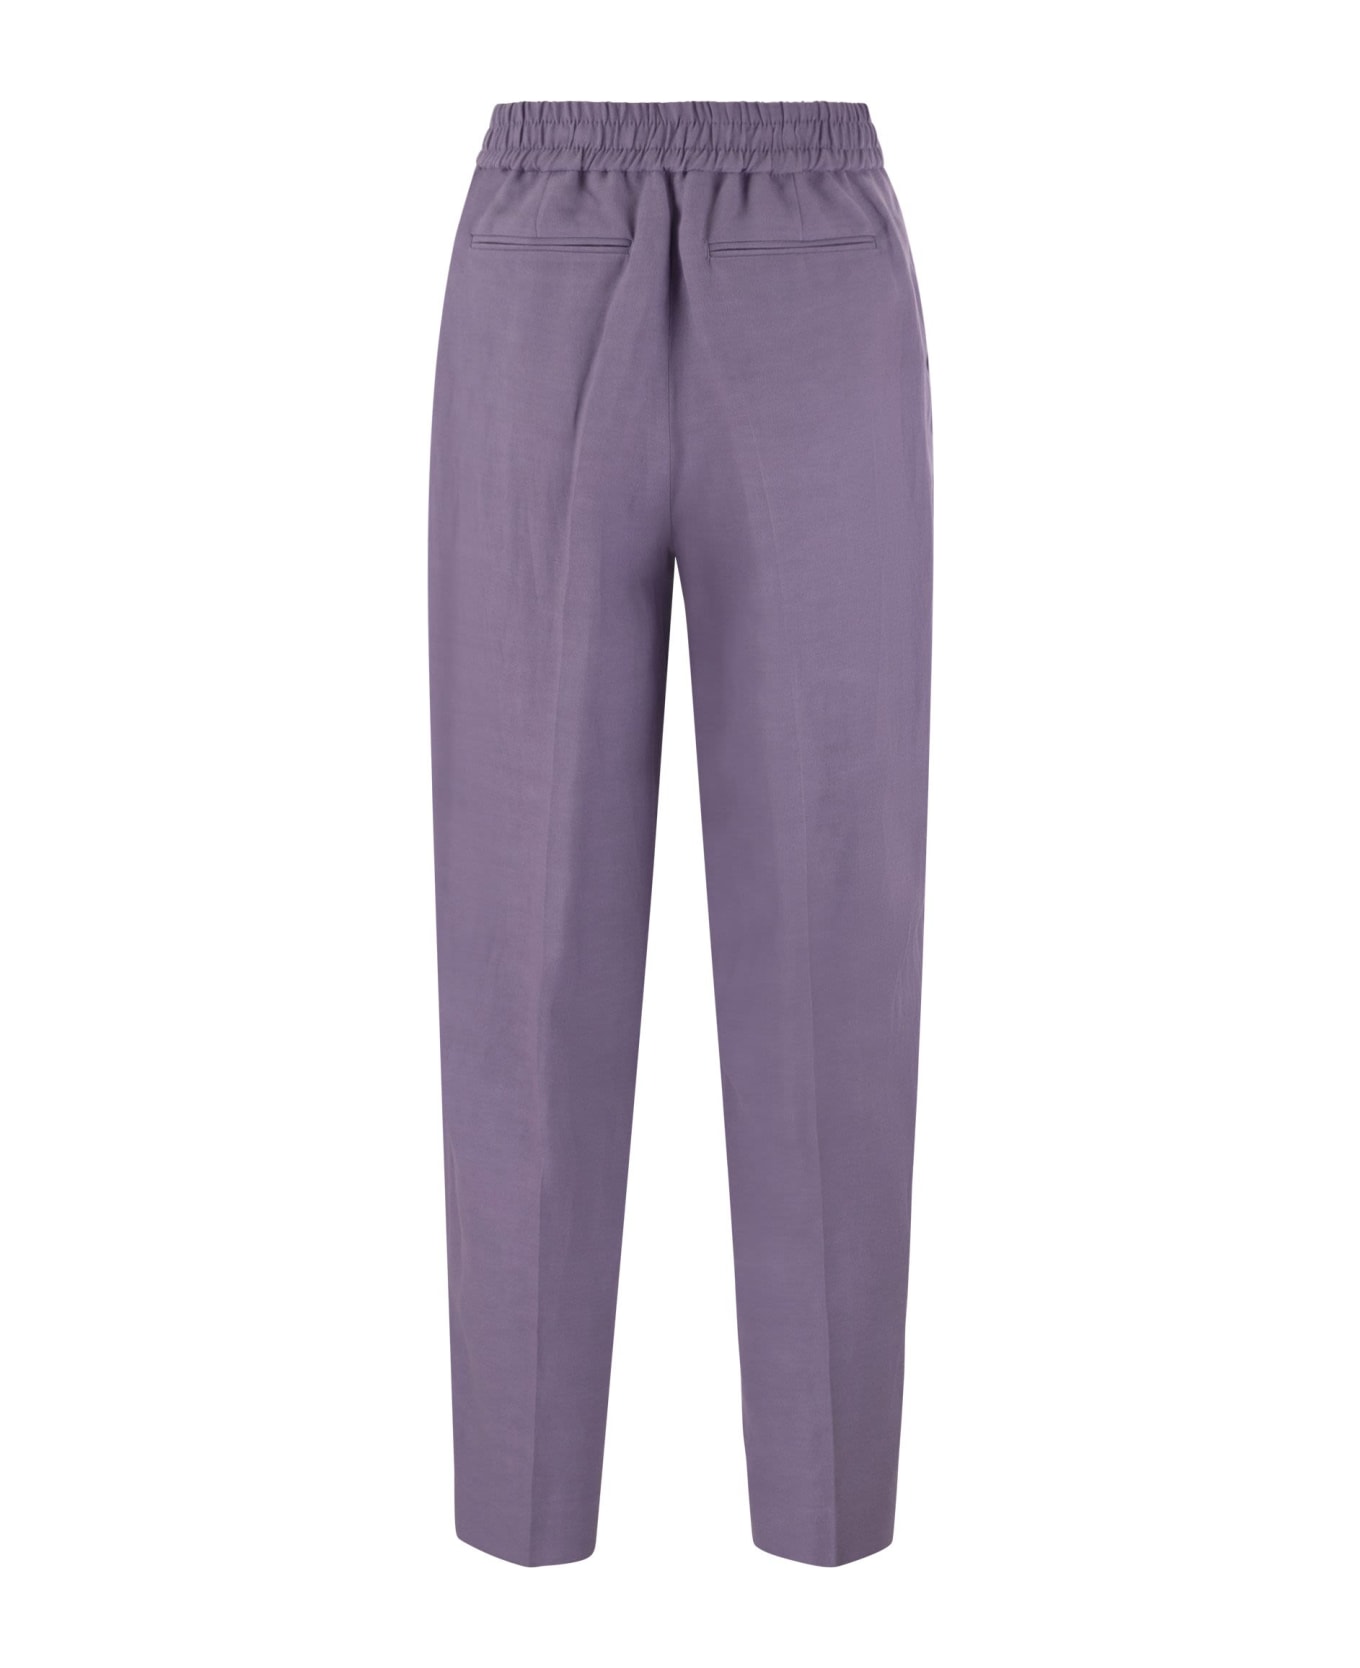 PT Torino Daisy - Viscose And Linen Trousers - Lilac